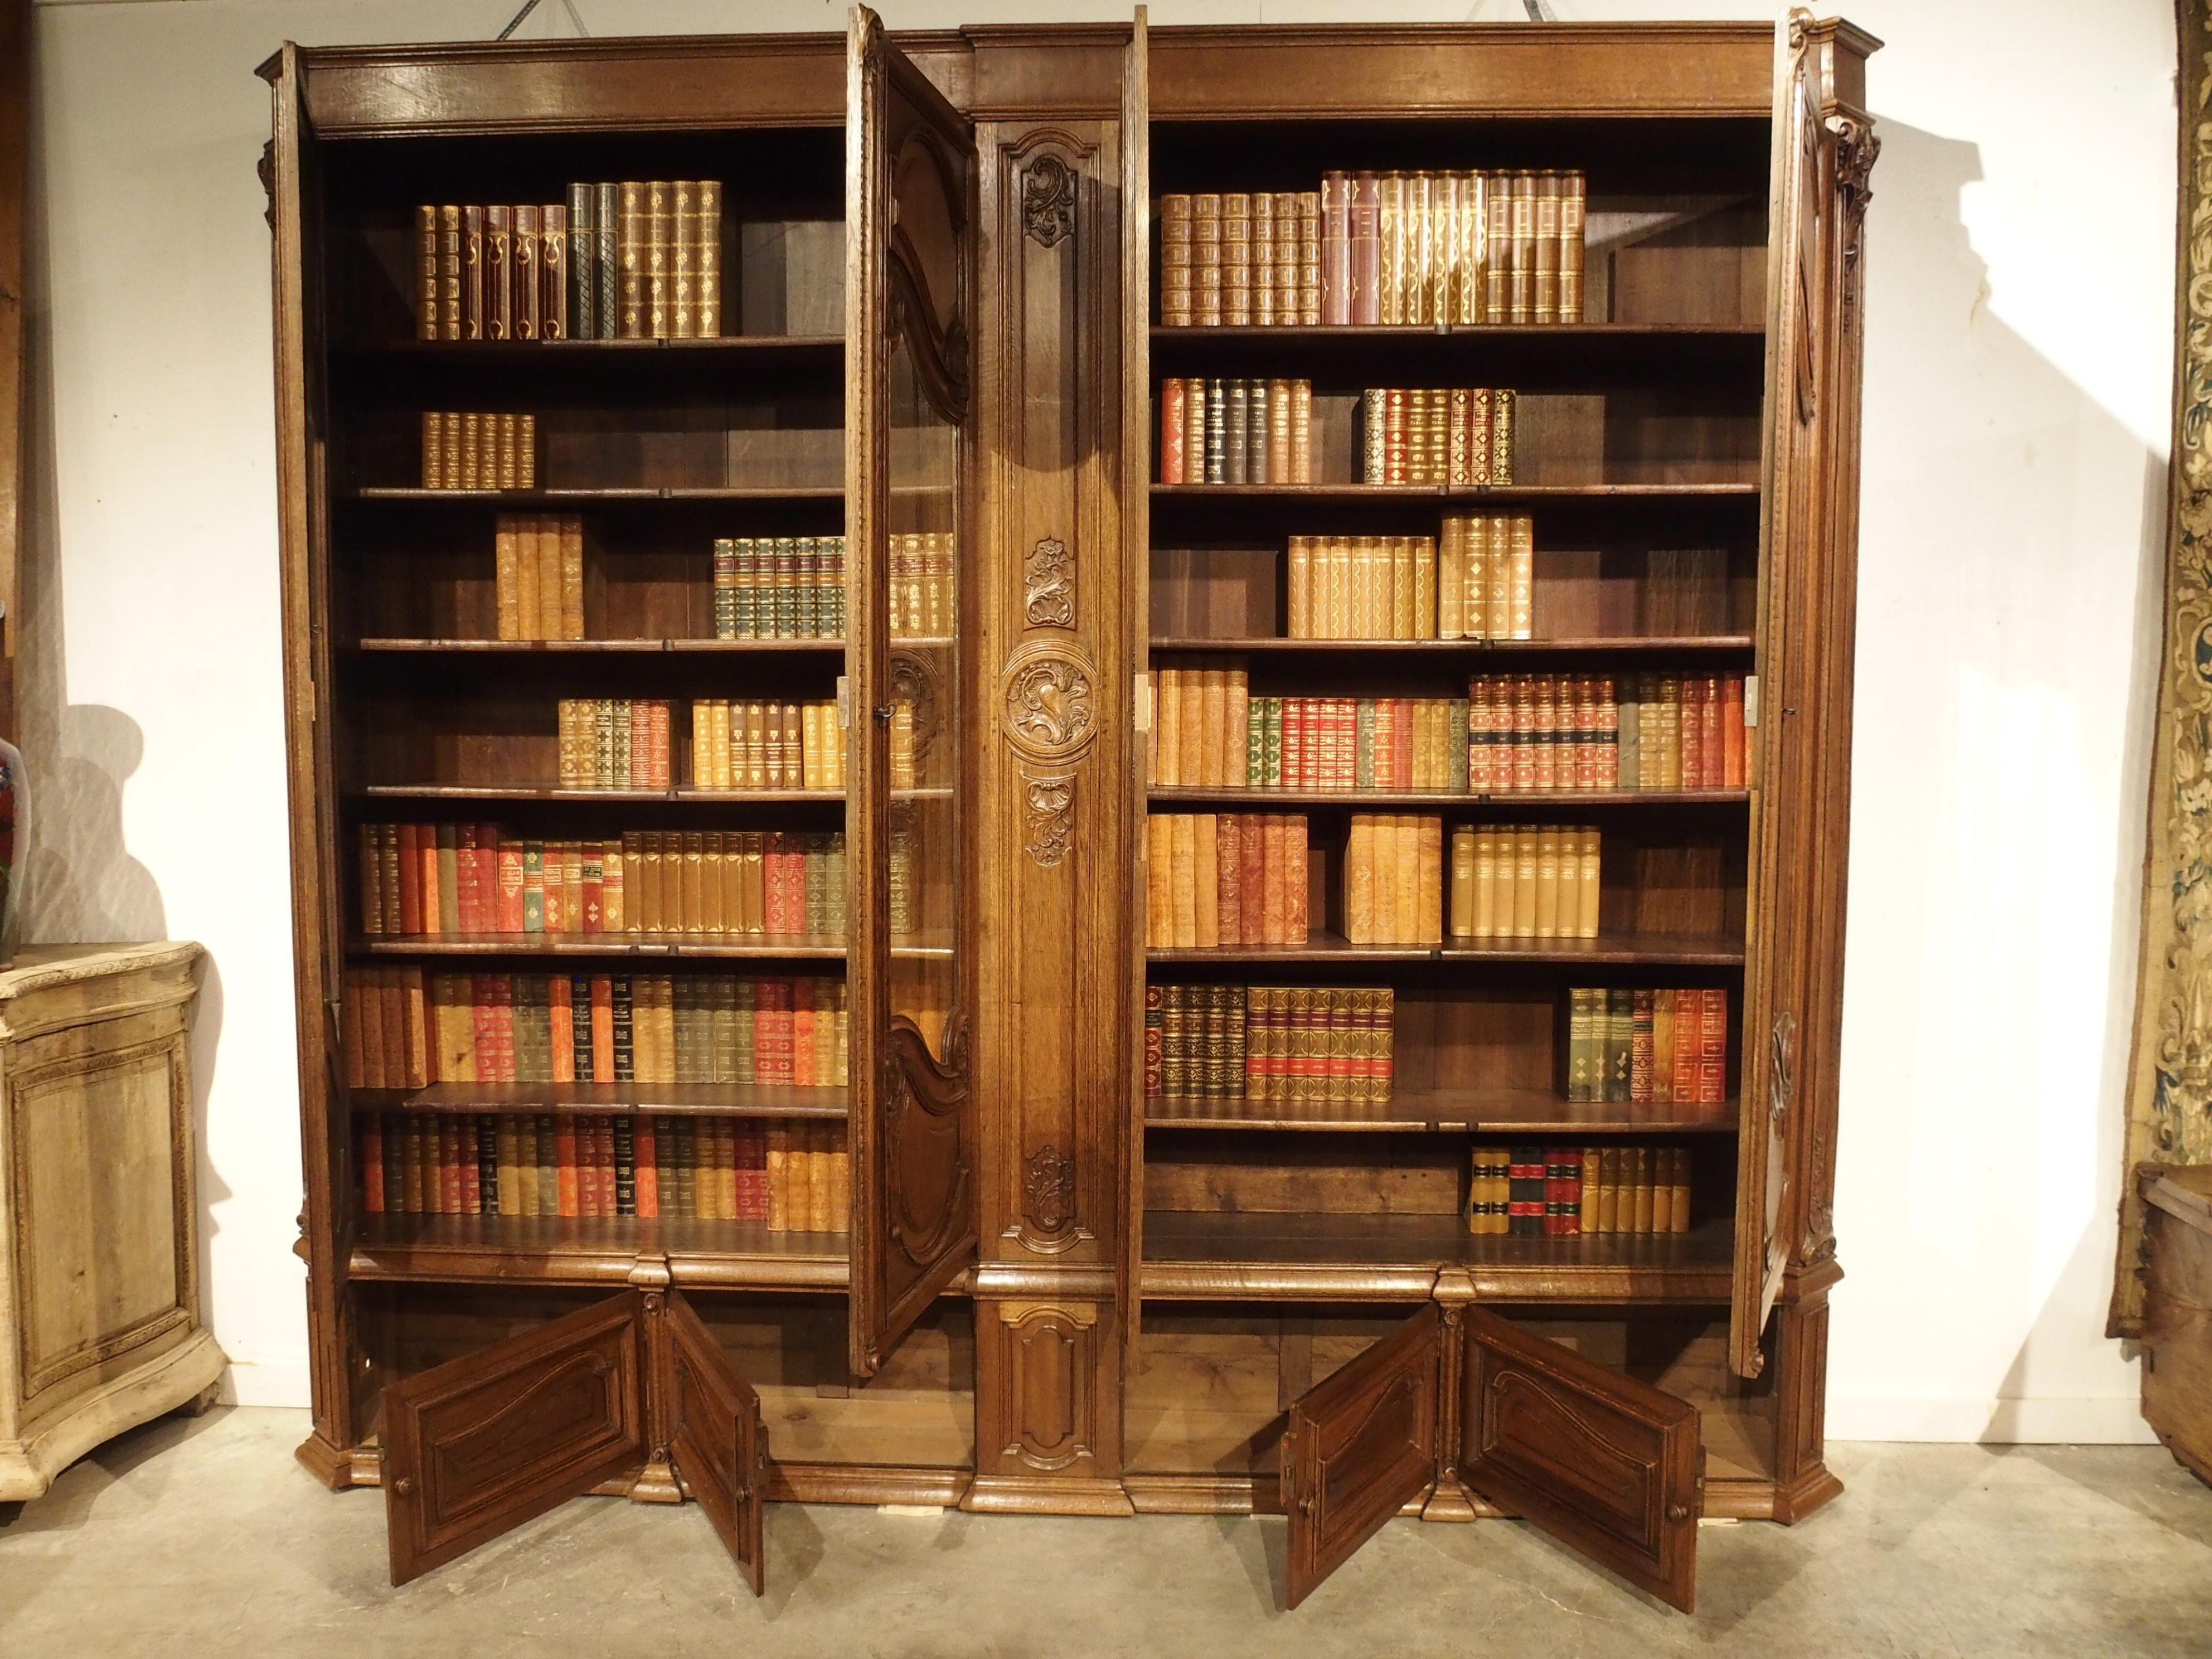 This fabulous antique French oak double bibliotheque recently came from an Estate in Nice, France. Although it has a large width of just over 10 feet, it has a very shallow depth of only 16 inches. This is not common in antique case pieces. The